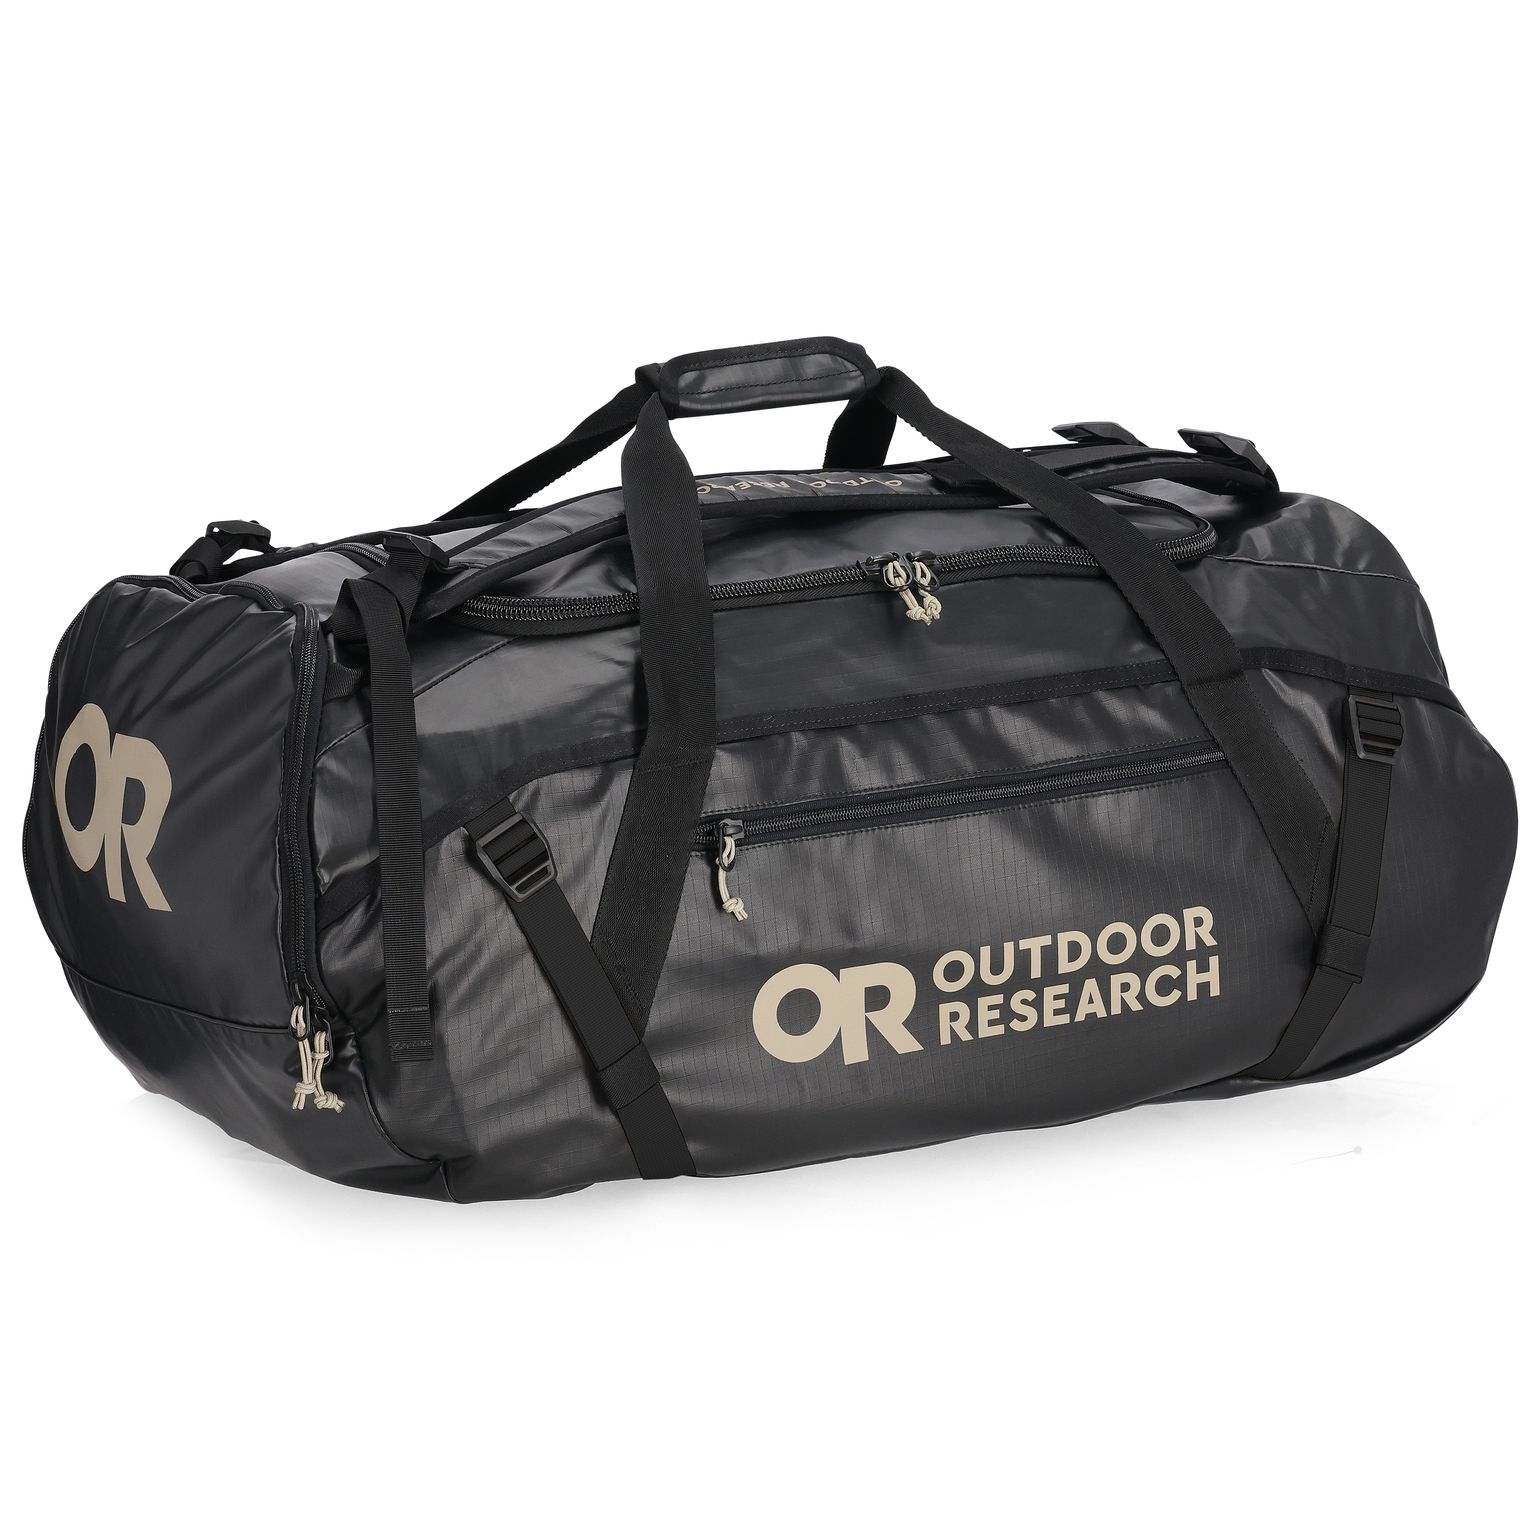 Outdoor Research Carryout Duffel 65l Black